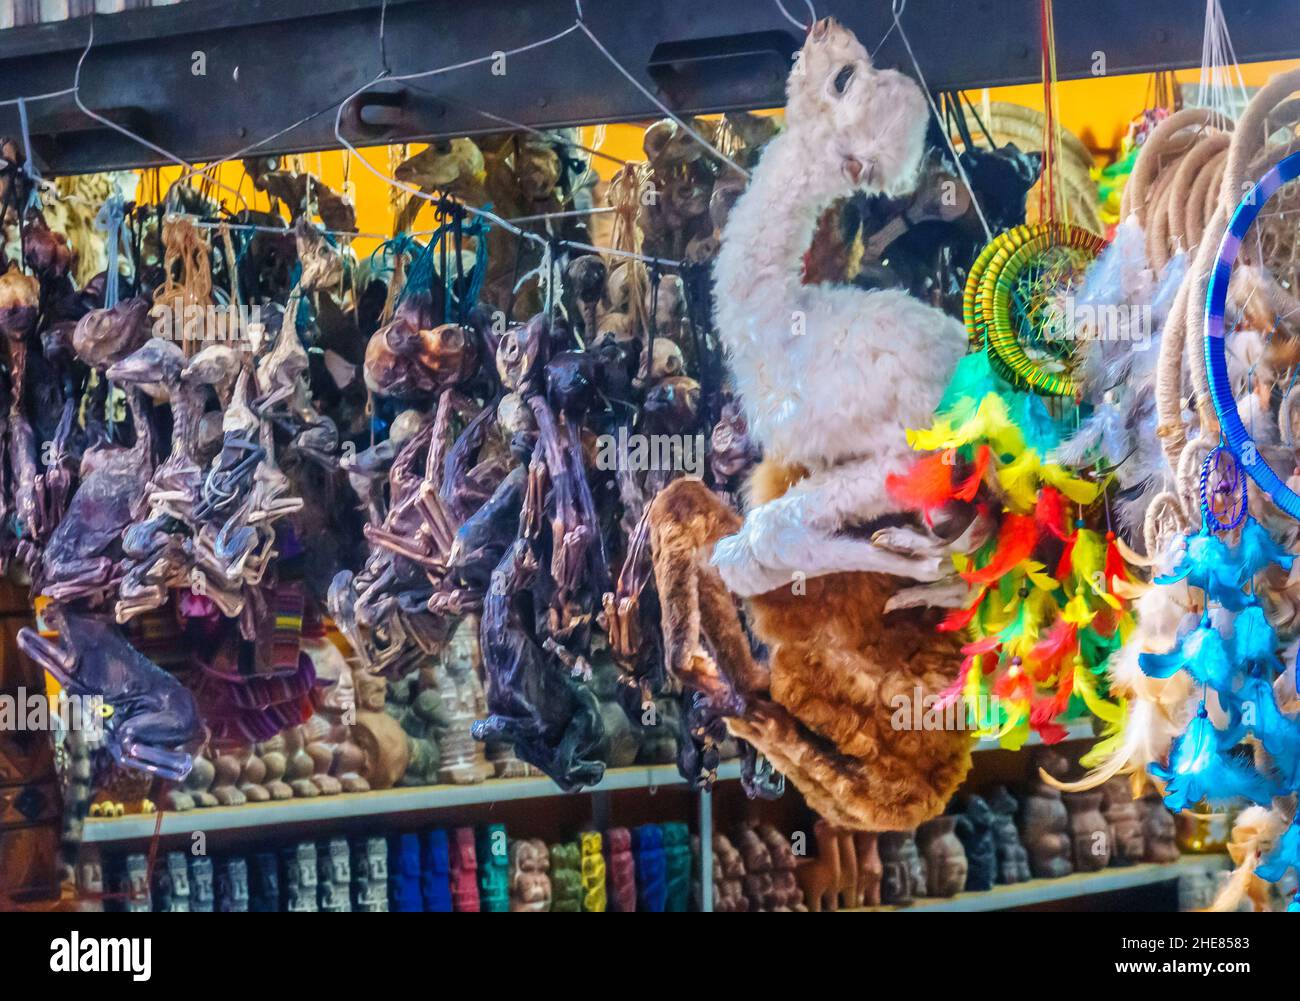 Llama fetuses at Witchdoctor Market in La Paz, Bolivia. High quality photo Stock Photo